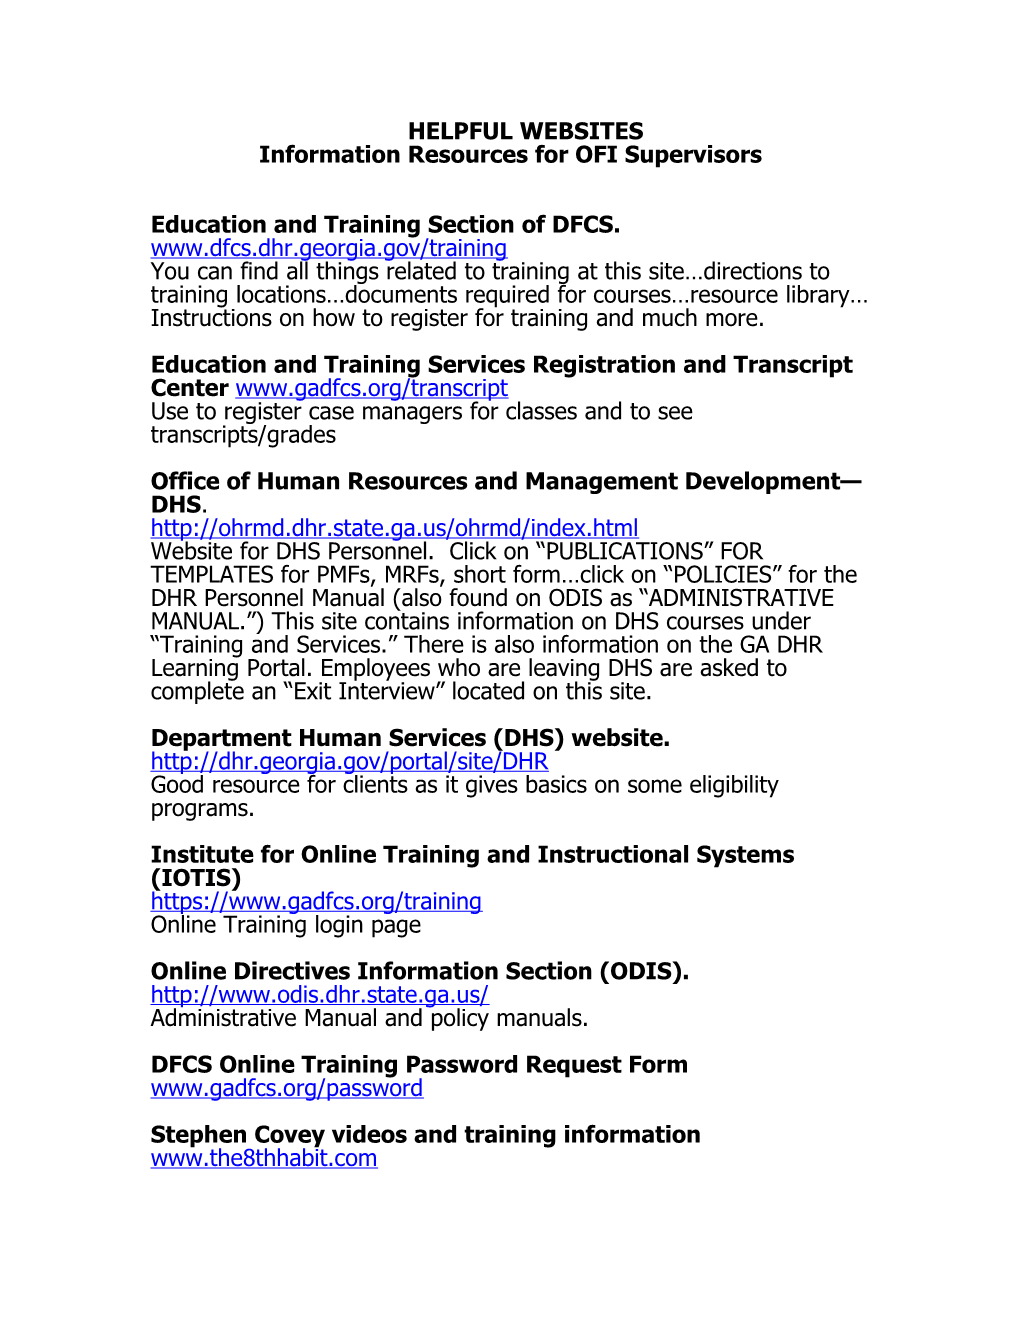 Information Resources for OFI Supervisors